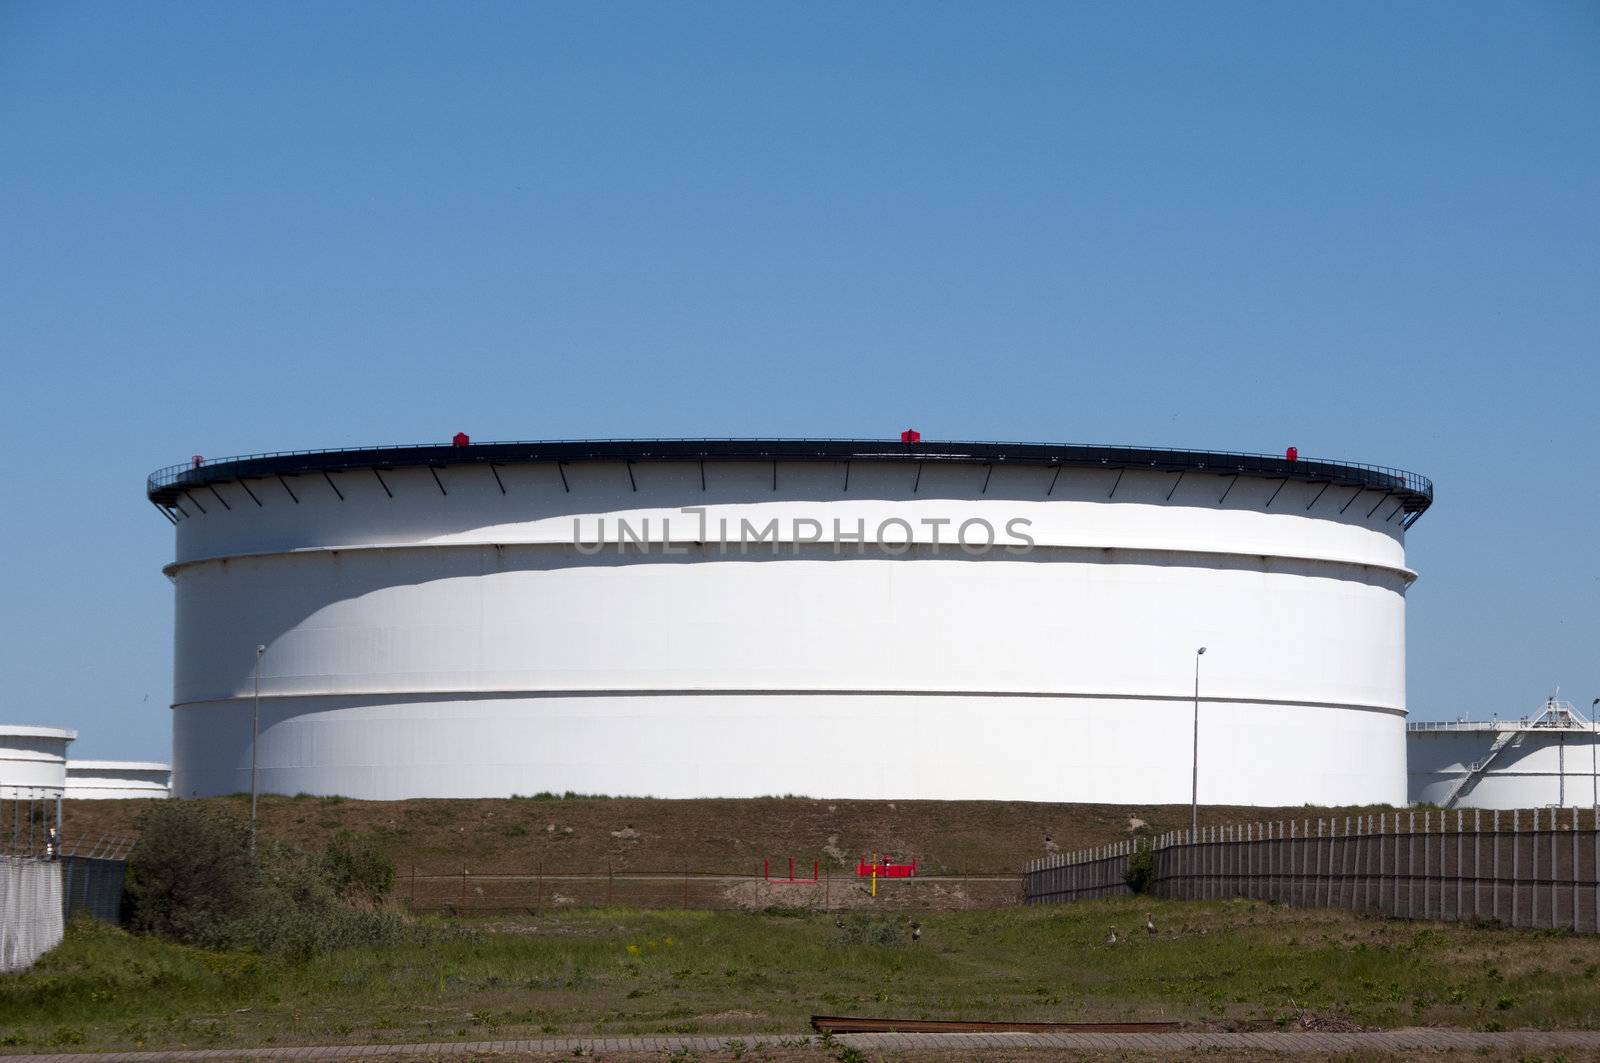 big tank in europoort harbour by compuinfoto